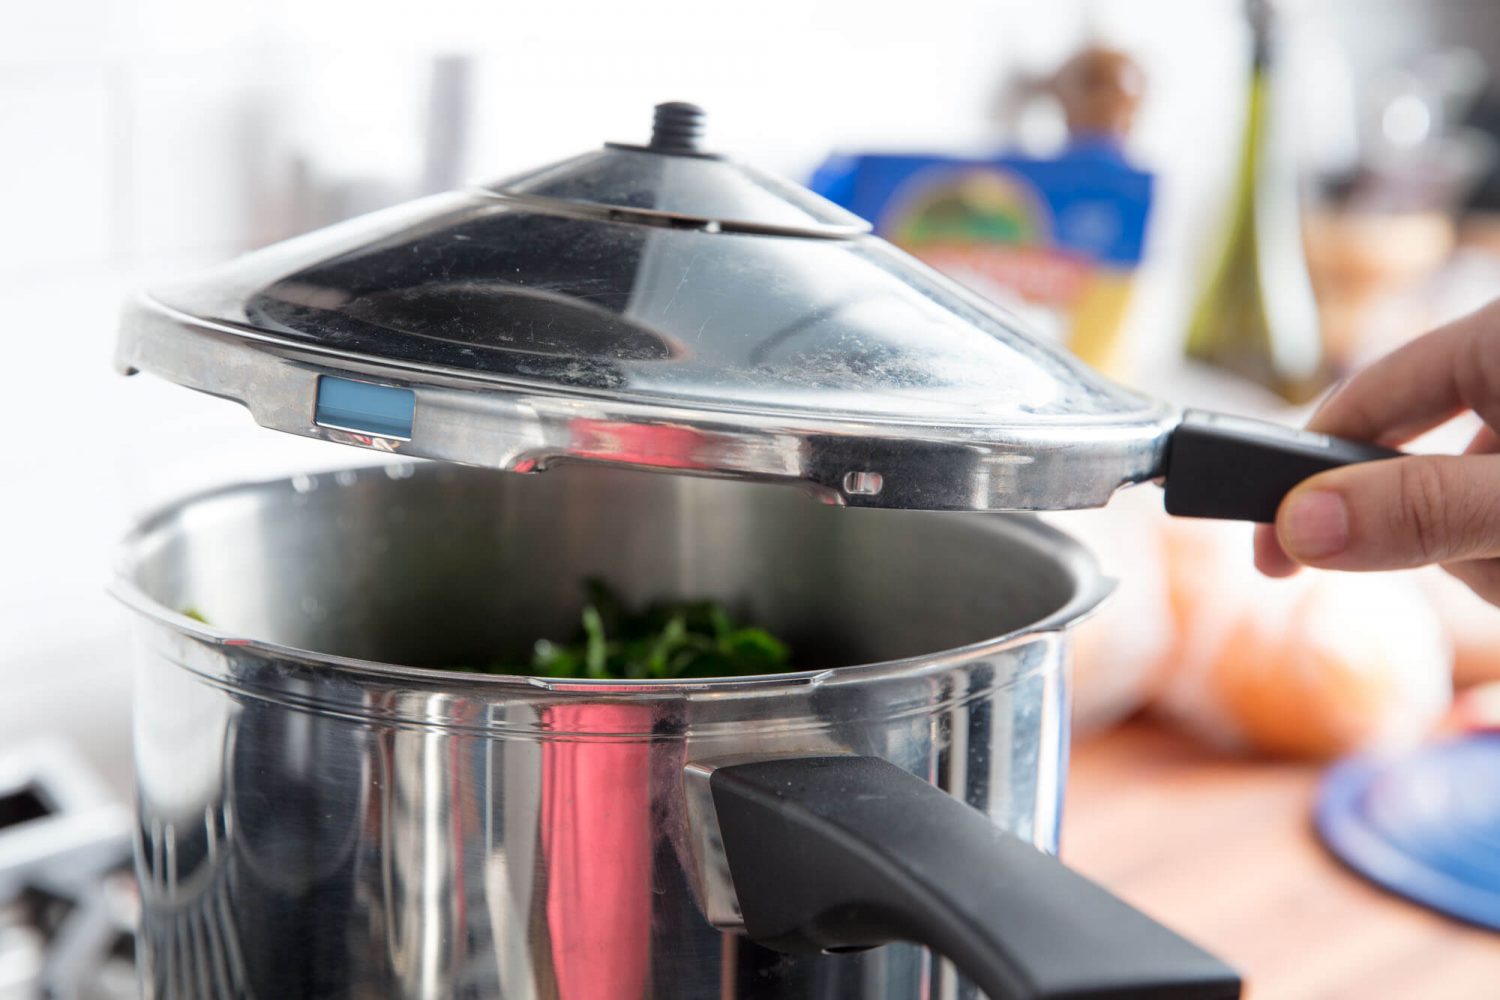 Pressure cooker handles are important for safety and convenience.